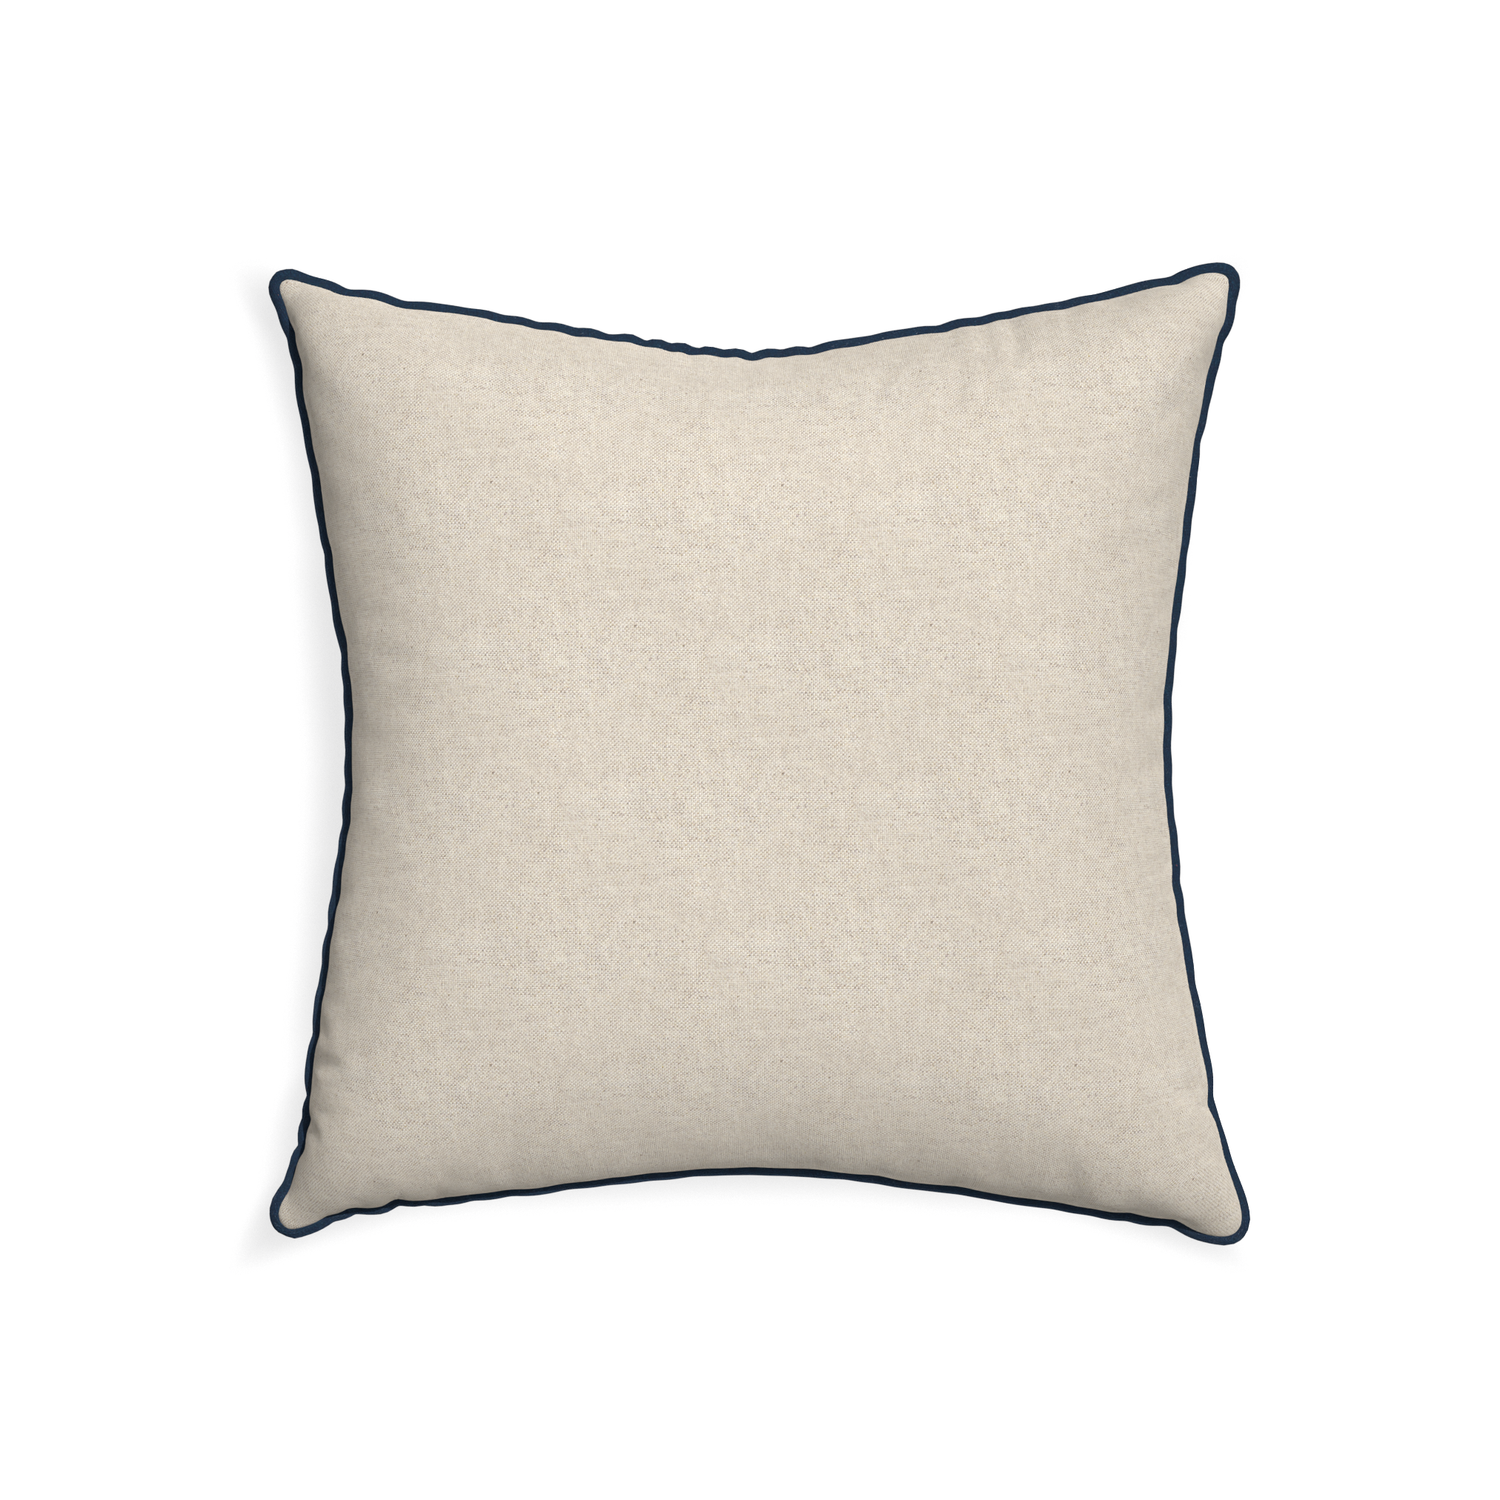 22-square oat custom light brownpillow with c piping on white background